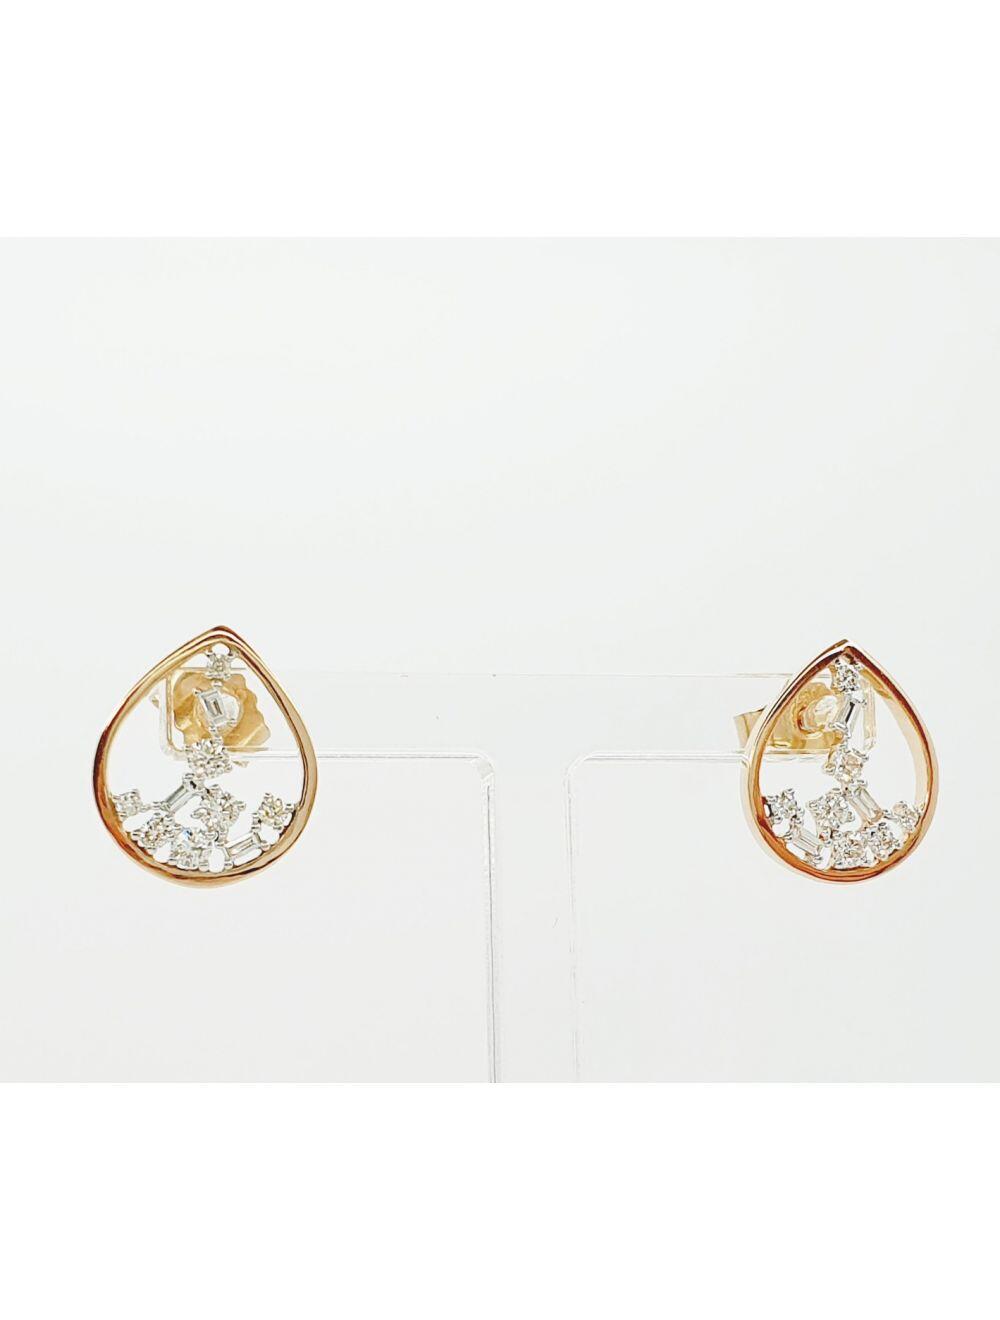 # Rose gold earrings with 0.40ct natural diamonds, dropped diamonds effect